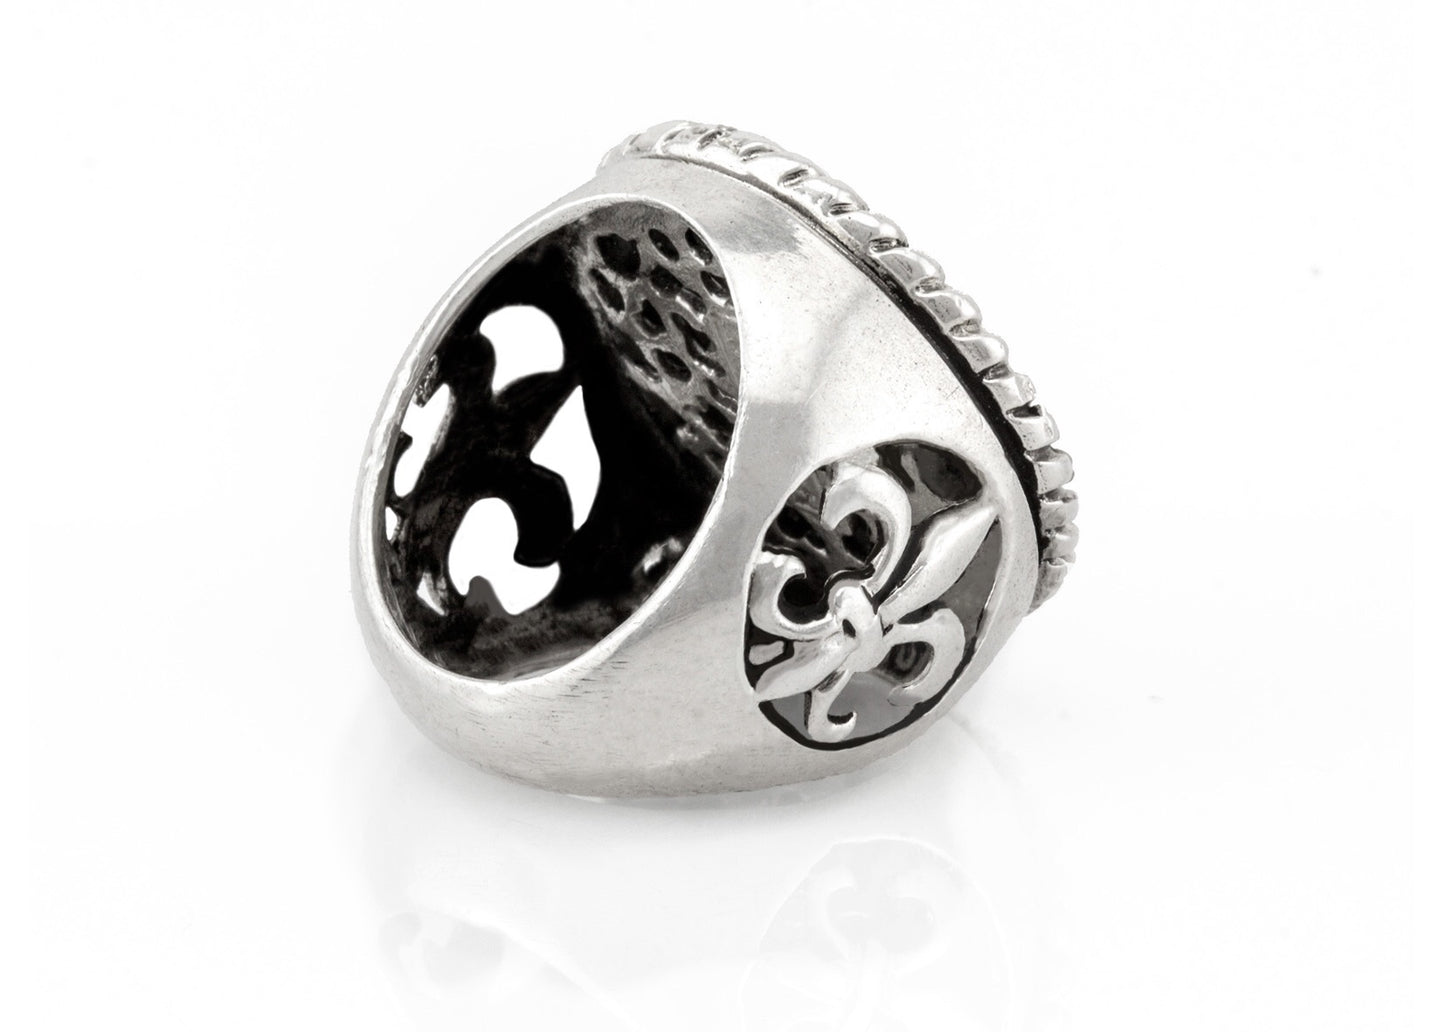 Ring with the Amen coin medallion in English on fleur de lis ring